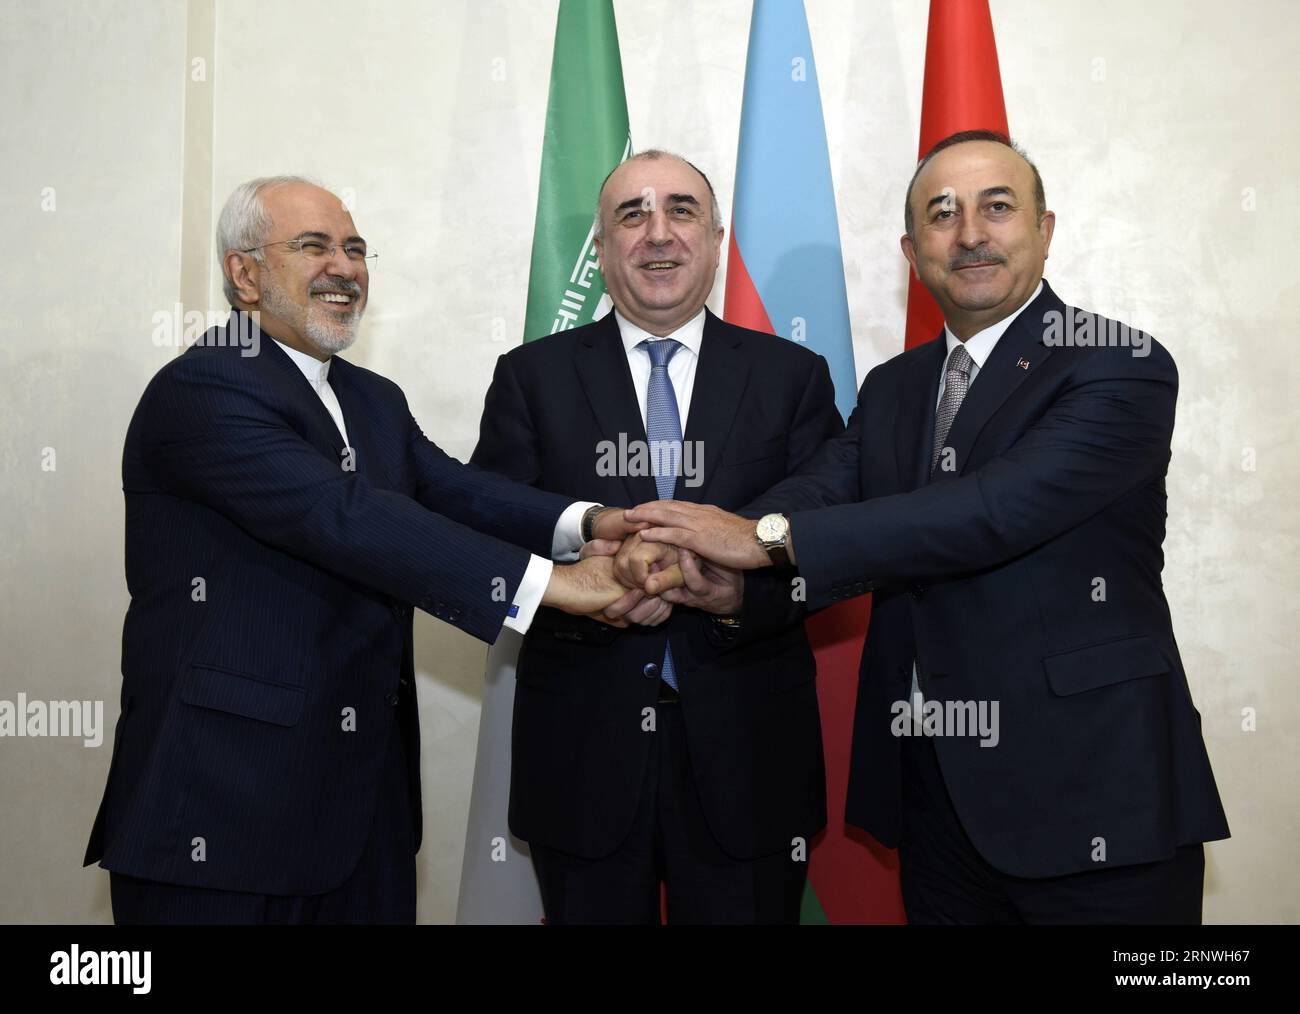 Bilder des Tages (171220) -- BAKU, Dec 20, 2017 -- Azerbaijani Foreign Minister Elmar Mammadyarov (C),Turkish Foreign Minister Mevlut Cavusoglu (R) and Iranian Foreign Minister Mohammad Javad Zarif shake hands before the fifth trilateral meeting of Azerbaijani, Iranian and Turkish Foreign Ministers in Baku, Azerbaijan, Dec 20, 2017.) AZERBAIJAN-BAKU-TRILATERAL FM MEETING TofikxBabayev PUBLICATIONxNOTxINxCHN Stock Photo